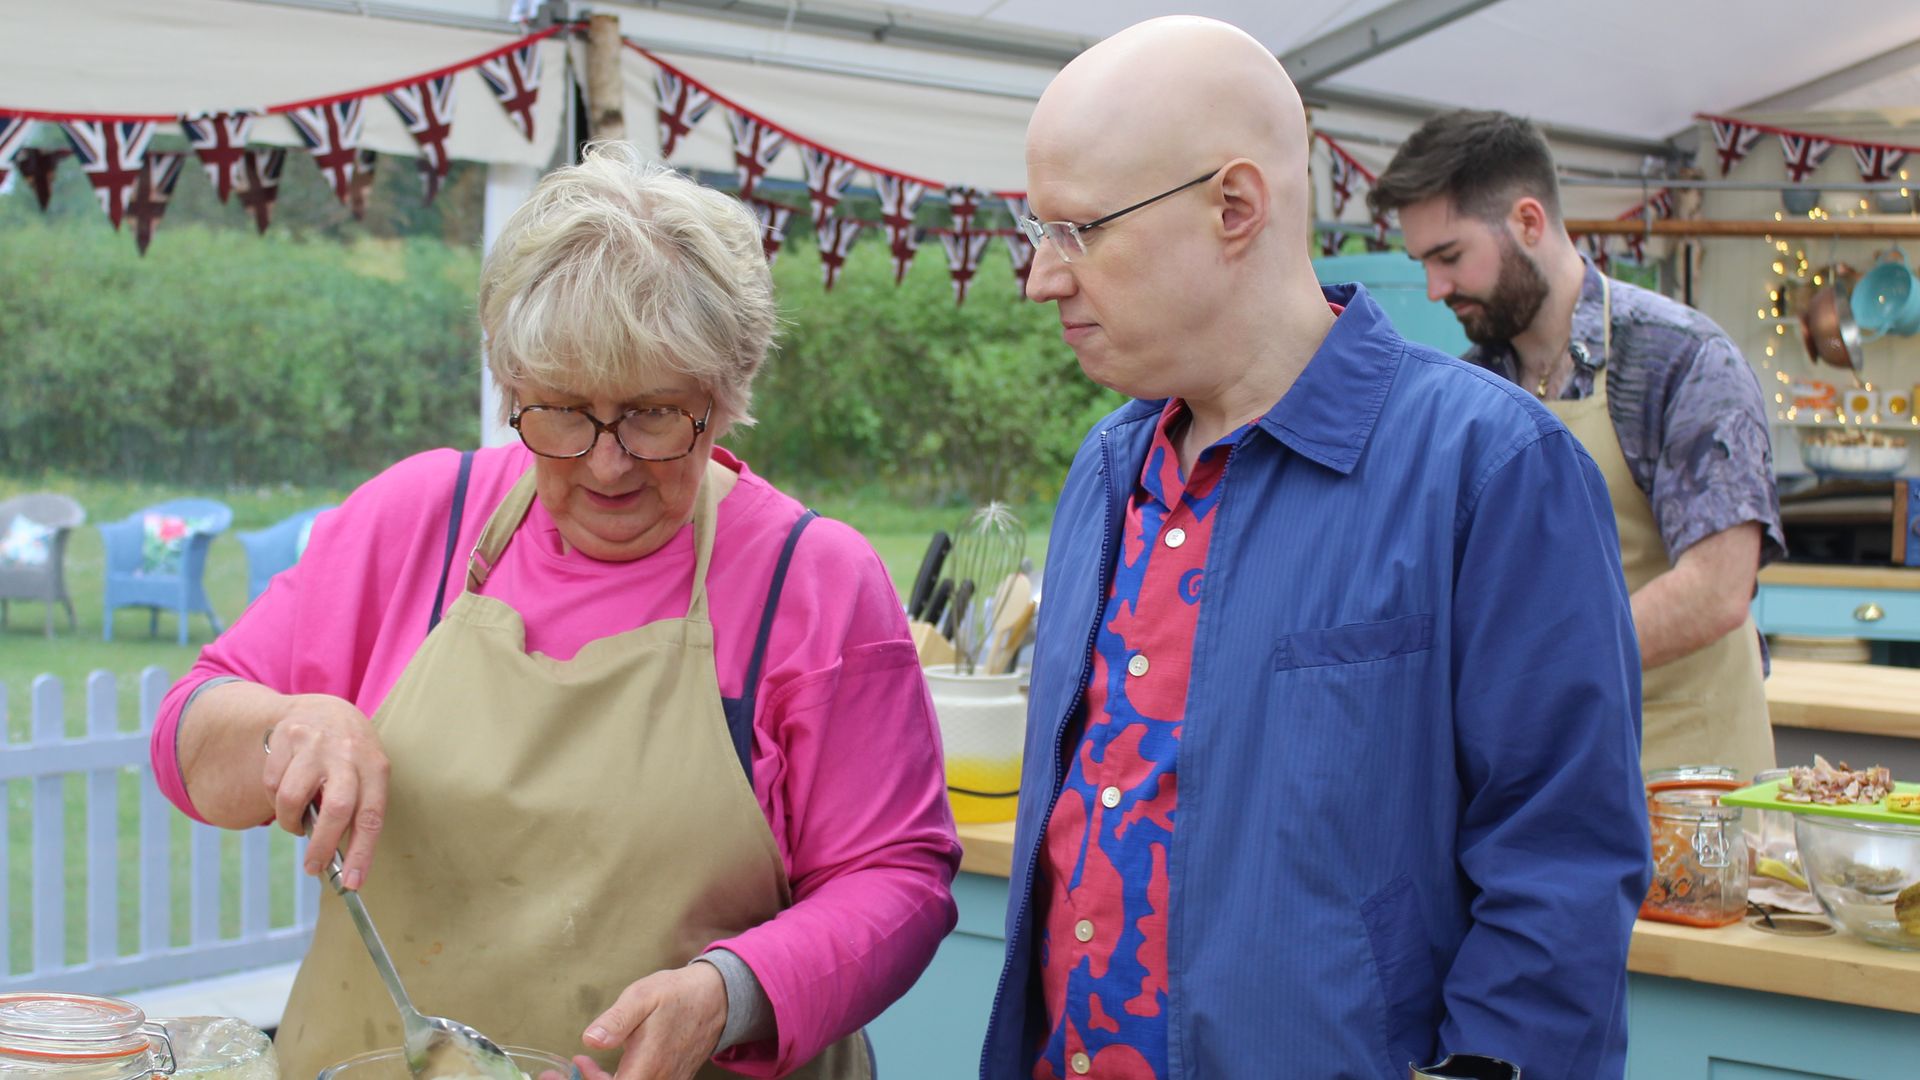 Matt on The Great British Bake Off with contestant Dawn as she bakes